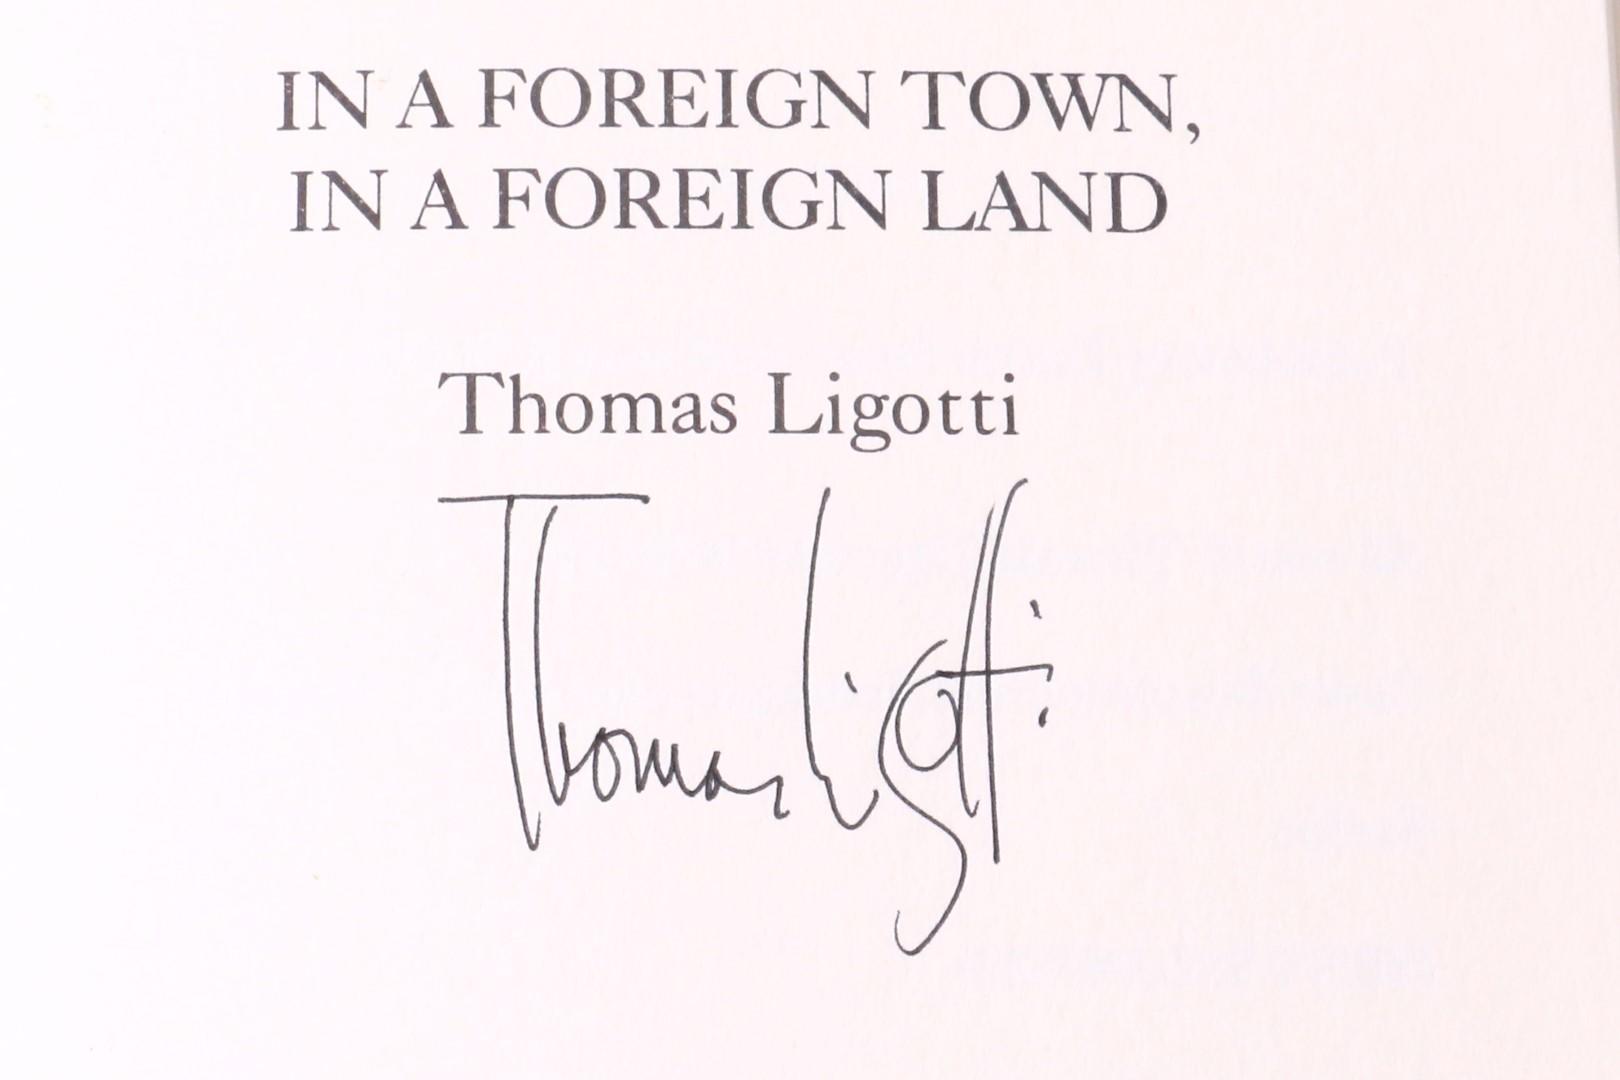 Thomas Ligotti - In a Foreign Town, In a Foreign Land - Durtro Press, 1997, First Edition.